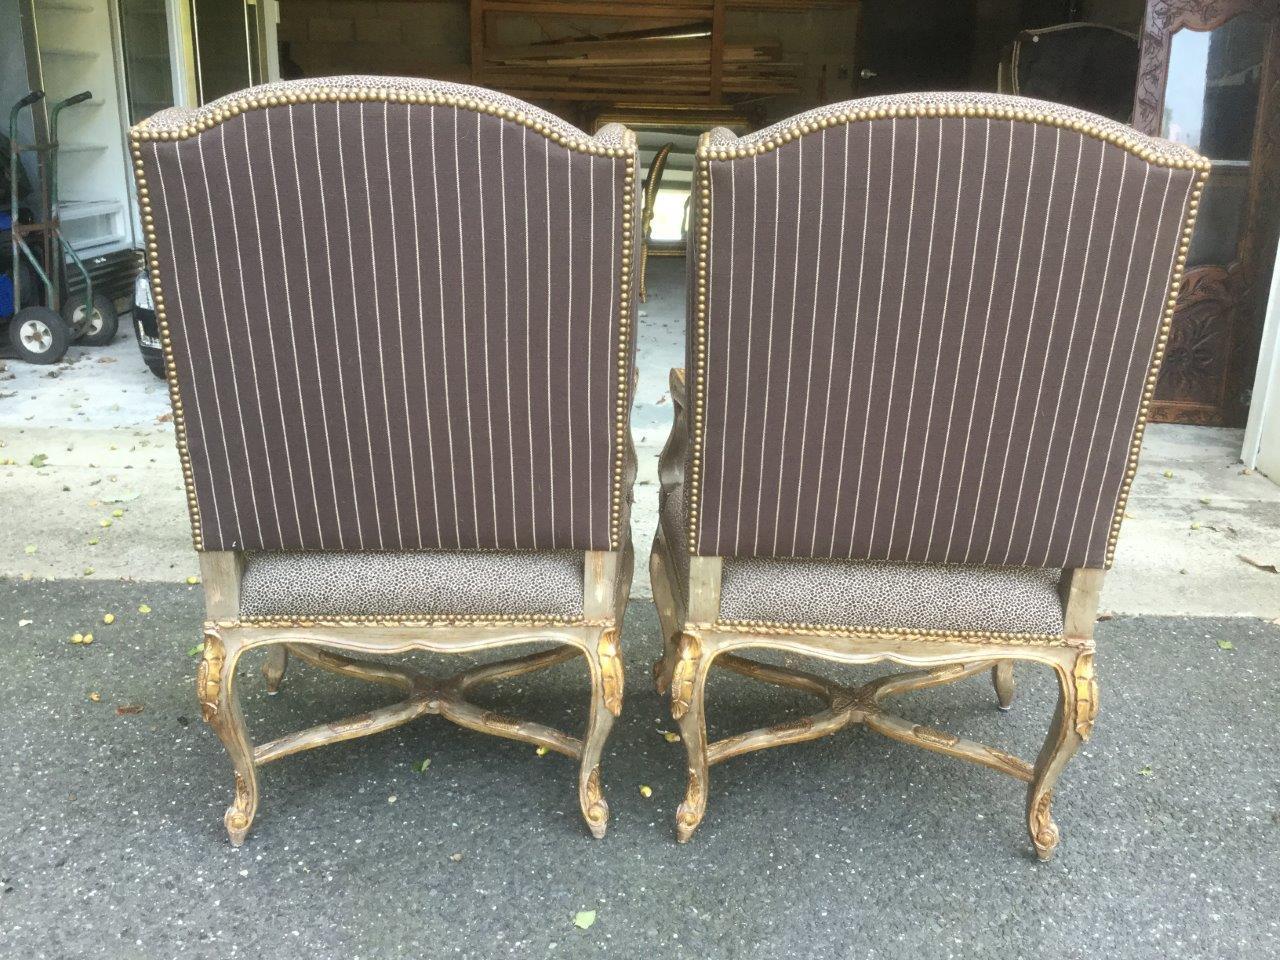 Glam Pair of Silver Painted French Wingback Chairs with Cheetah Upholstery For Sale 3